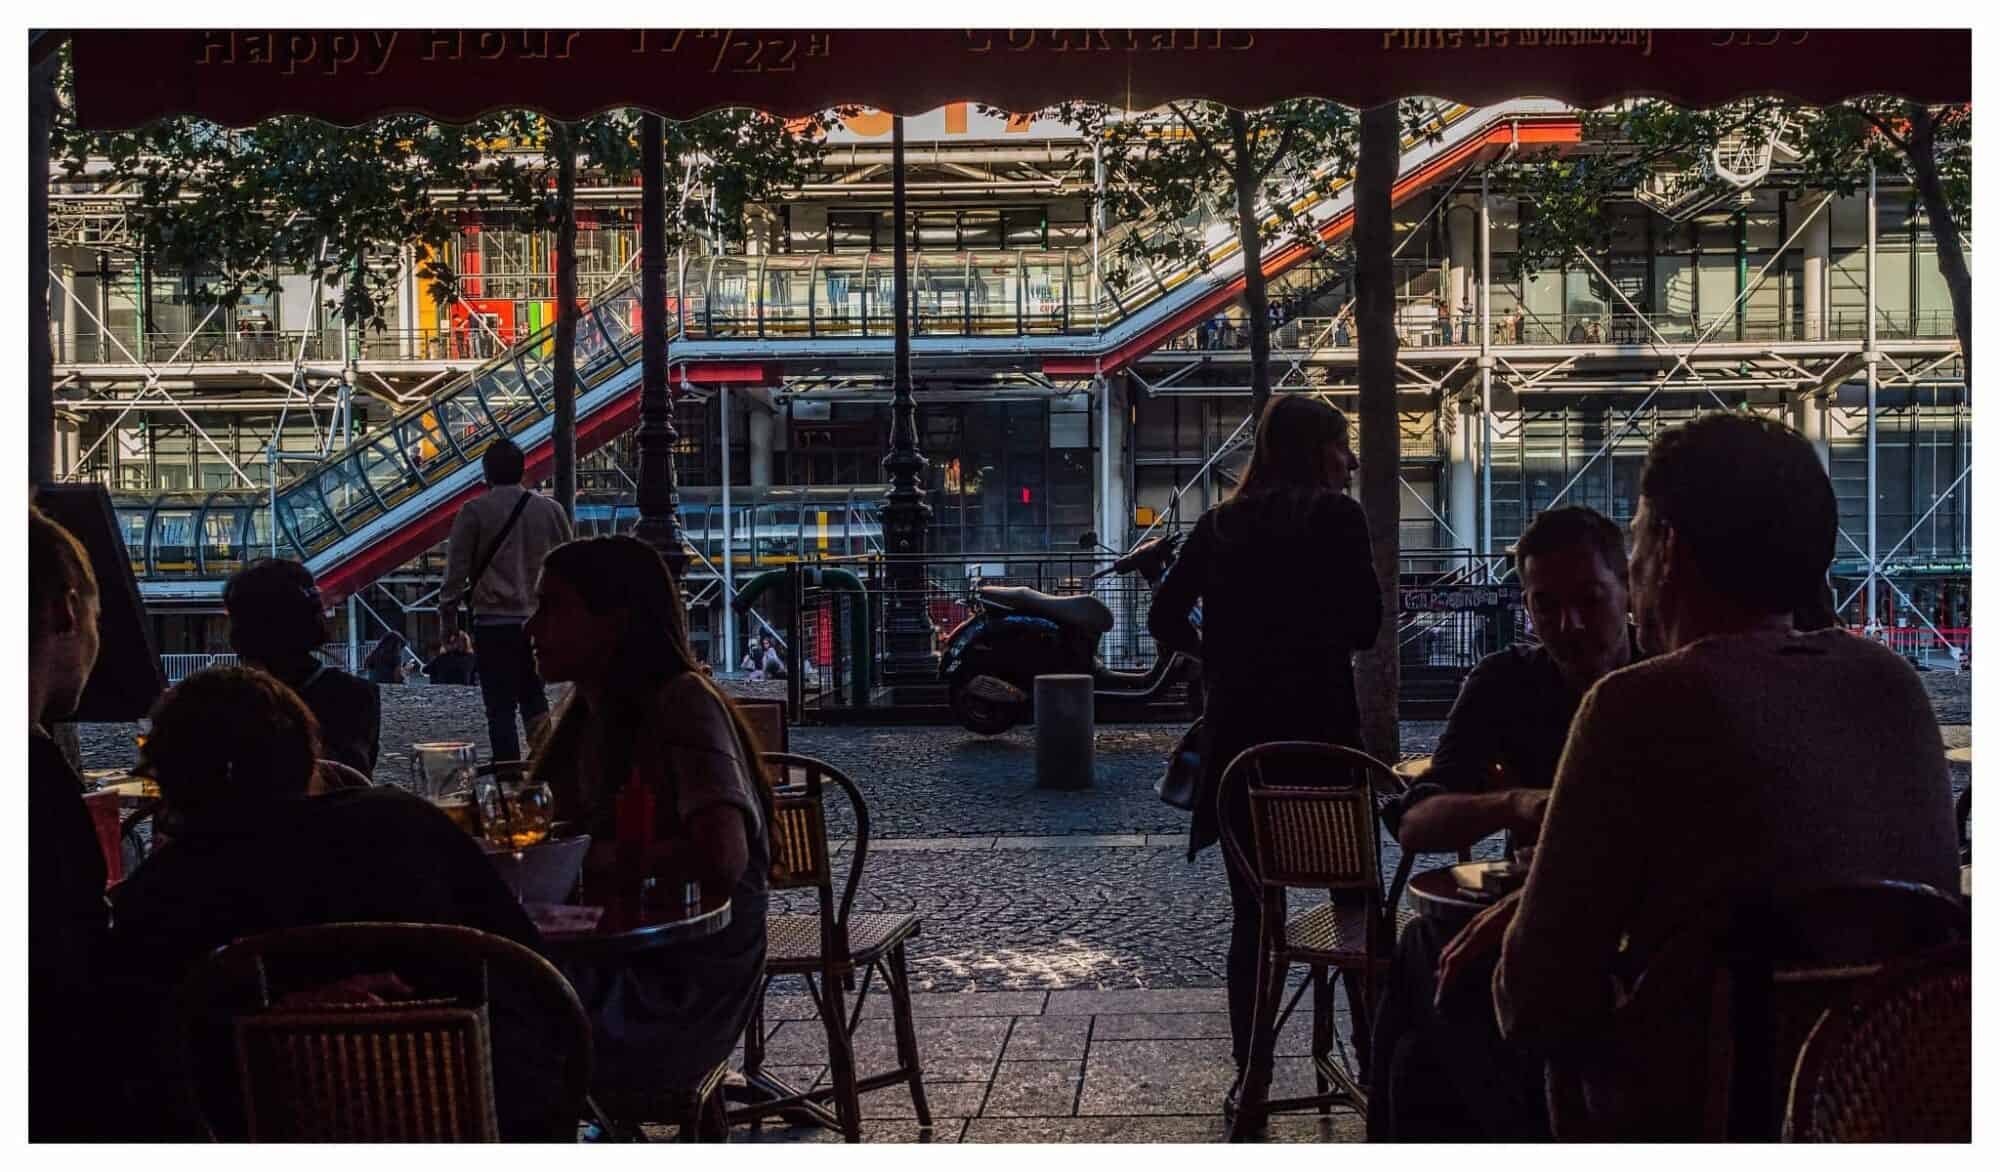 A scene from a Parisian terrace with patrons sat at outdoor tables and the Pompidou Center in the background.